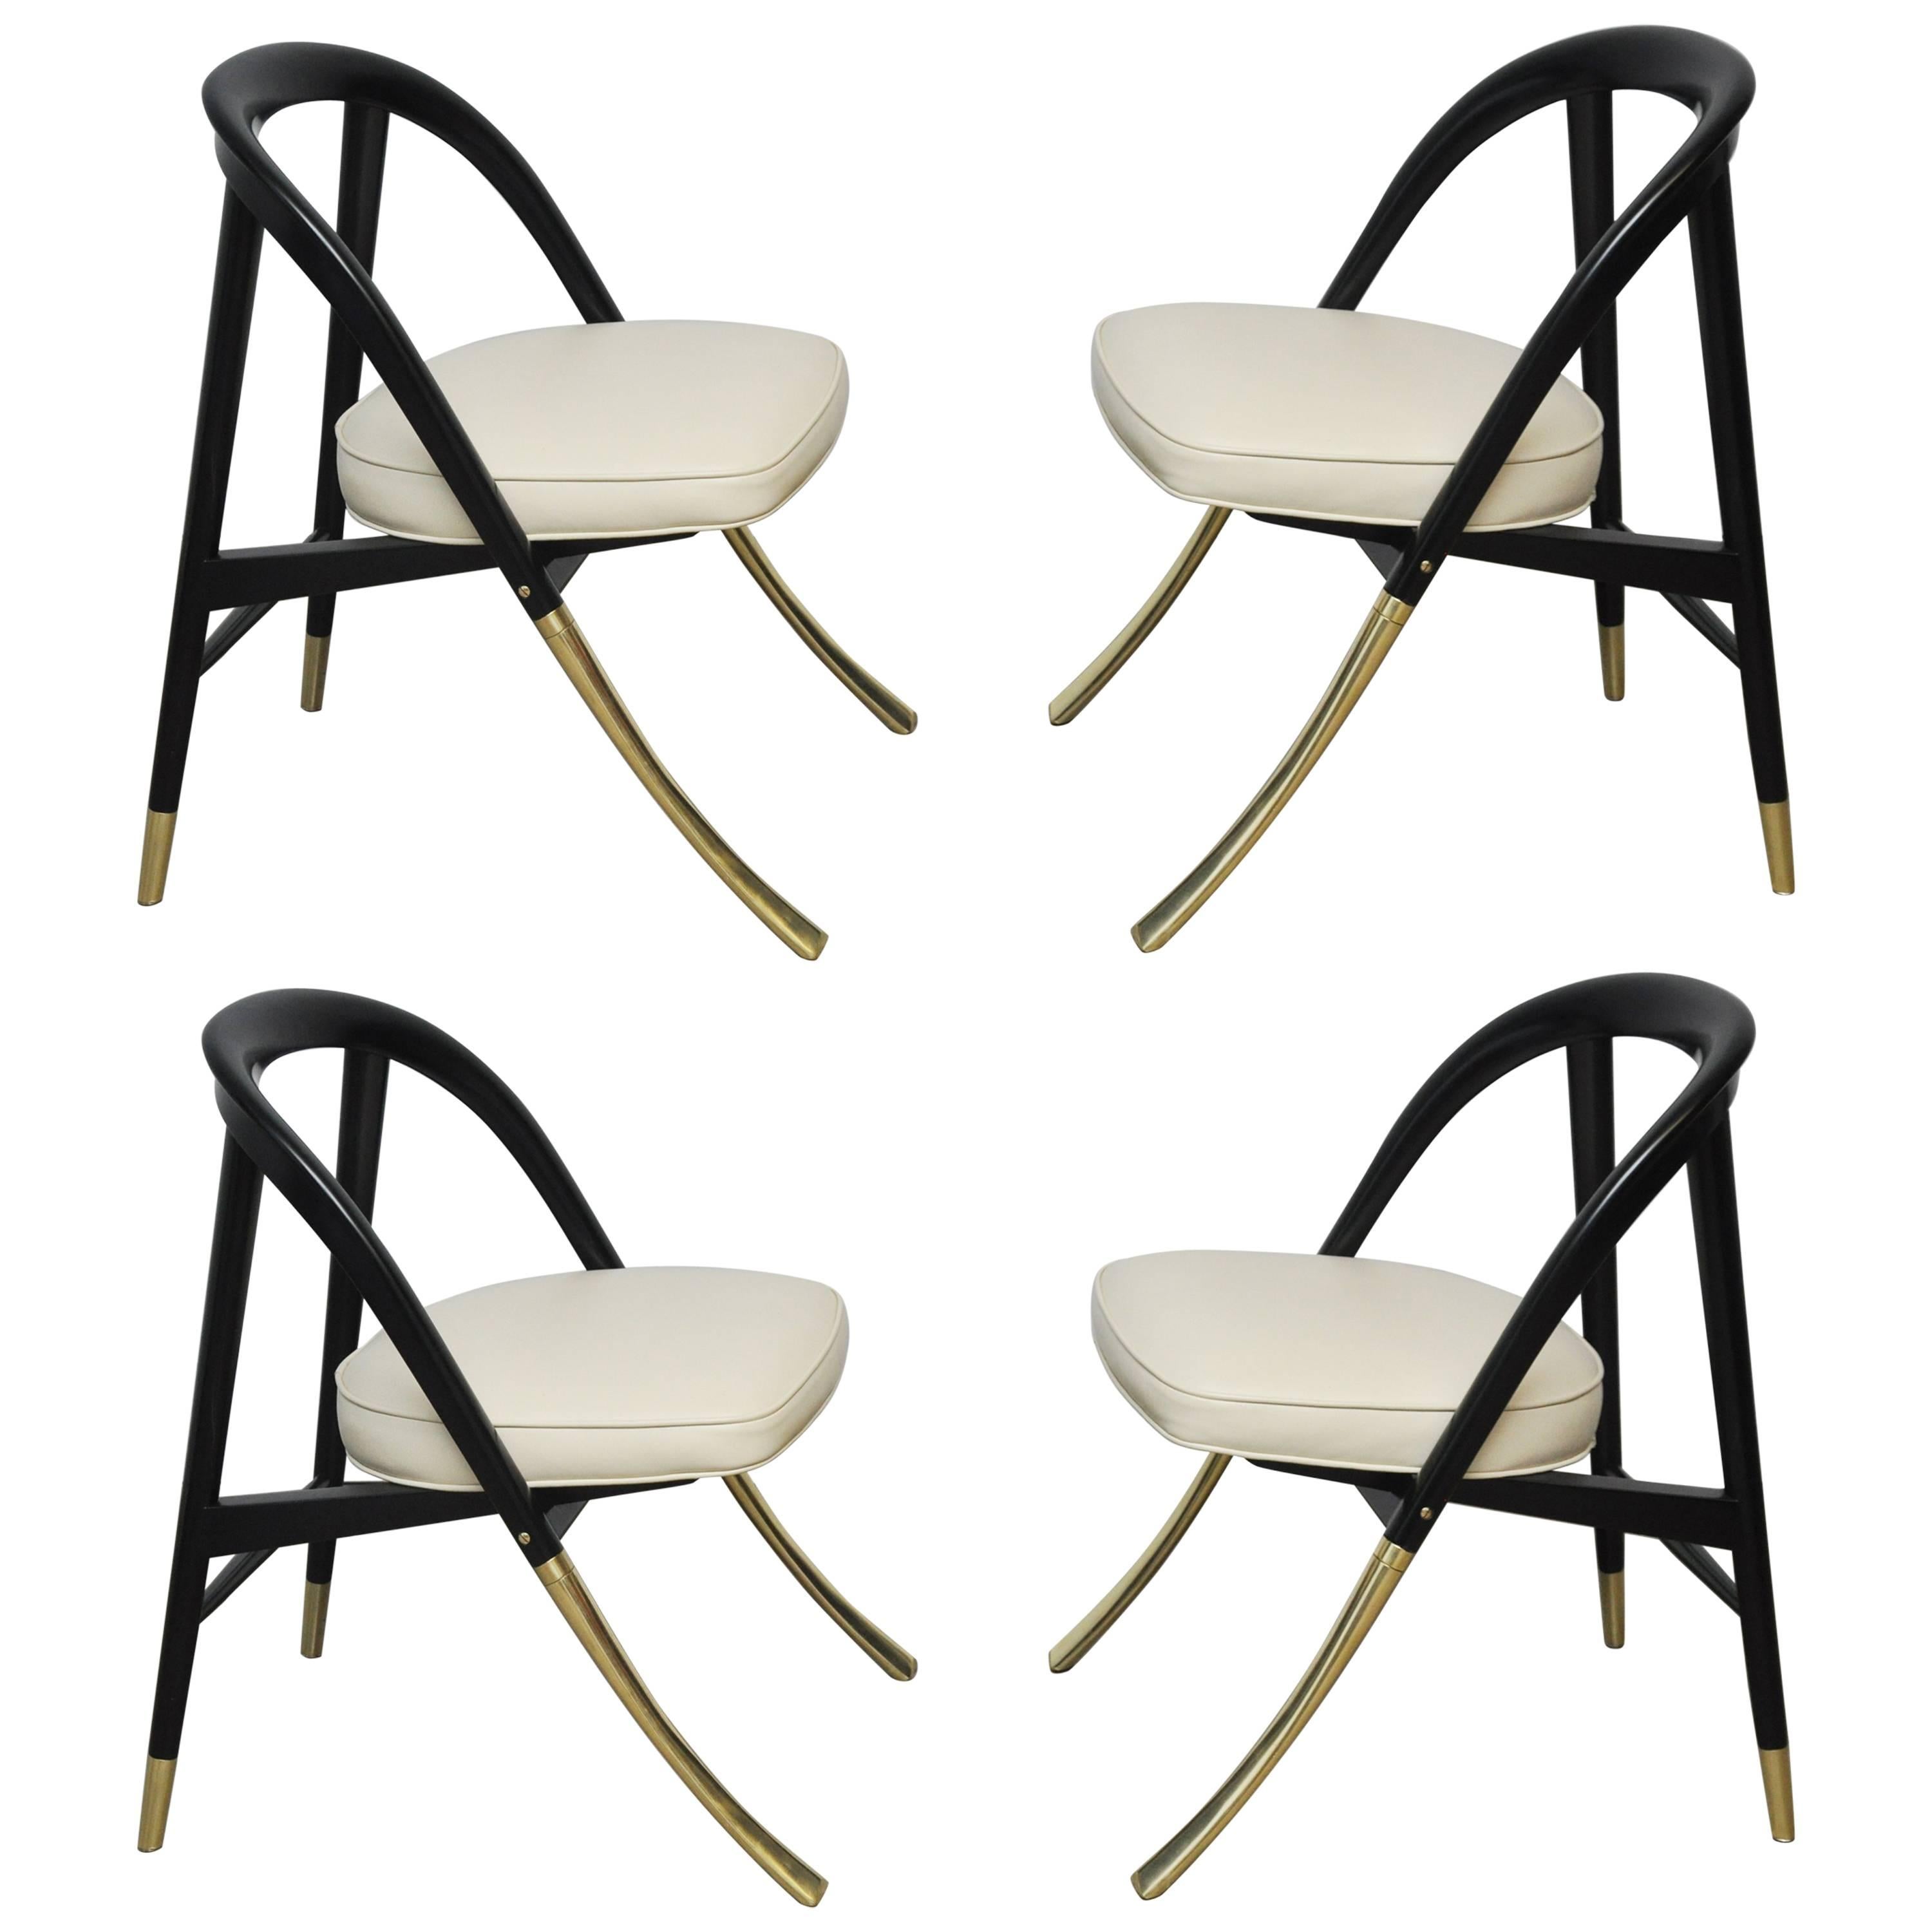 Pair of "A Chair" by Edward Wormley for Dunbar